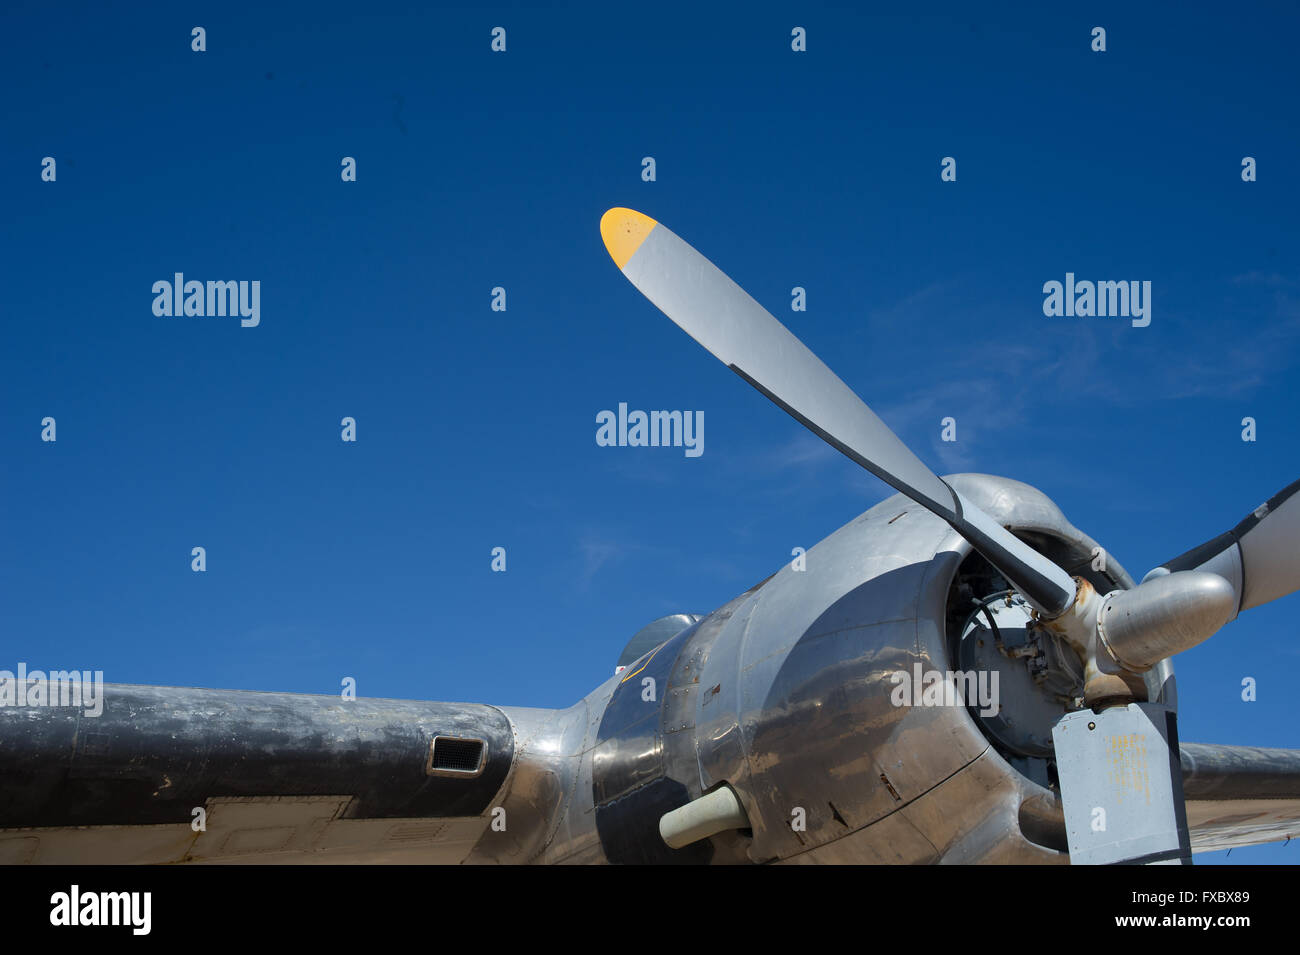 Airplane storage yard outside a air museum with various planes and parts Stock Photo